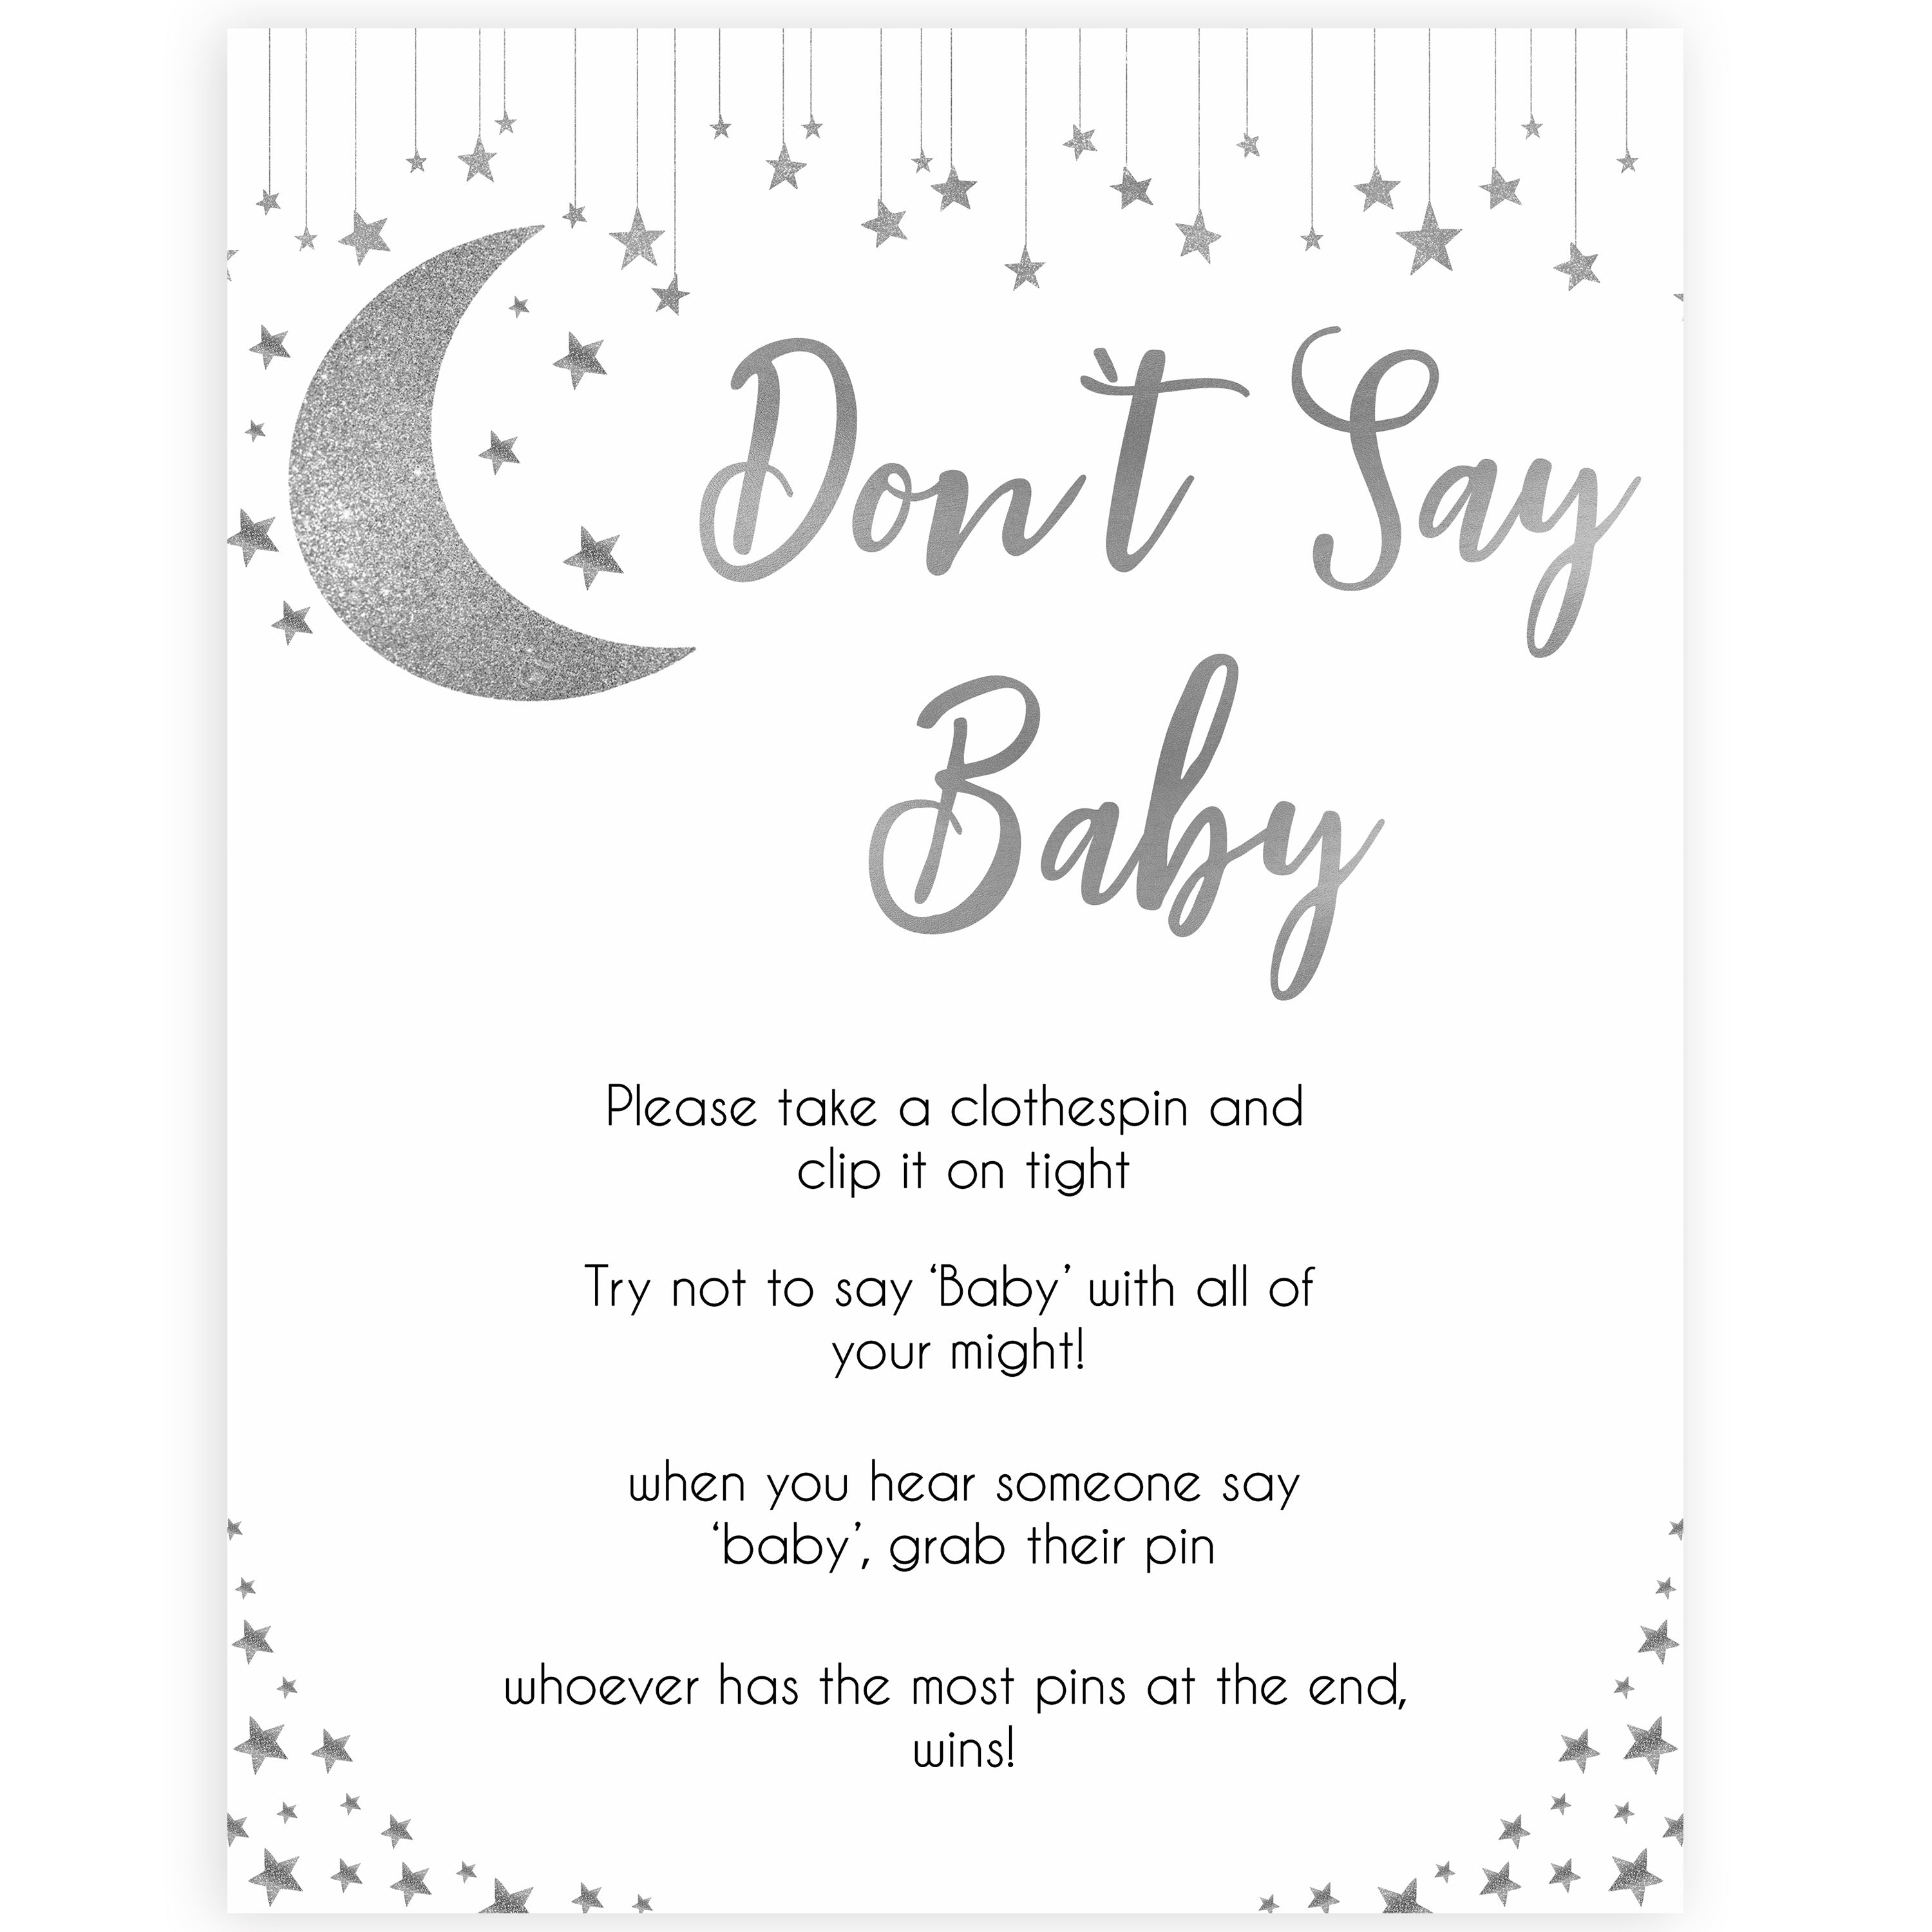 Silver little star, dont say baby baby games, baby shower games, printable baby games, fun baby games, twinkle little star games, baby games, fun baby shower ideas, baby shower ideas